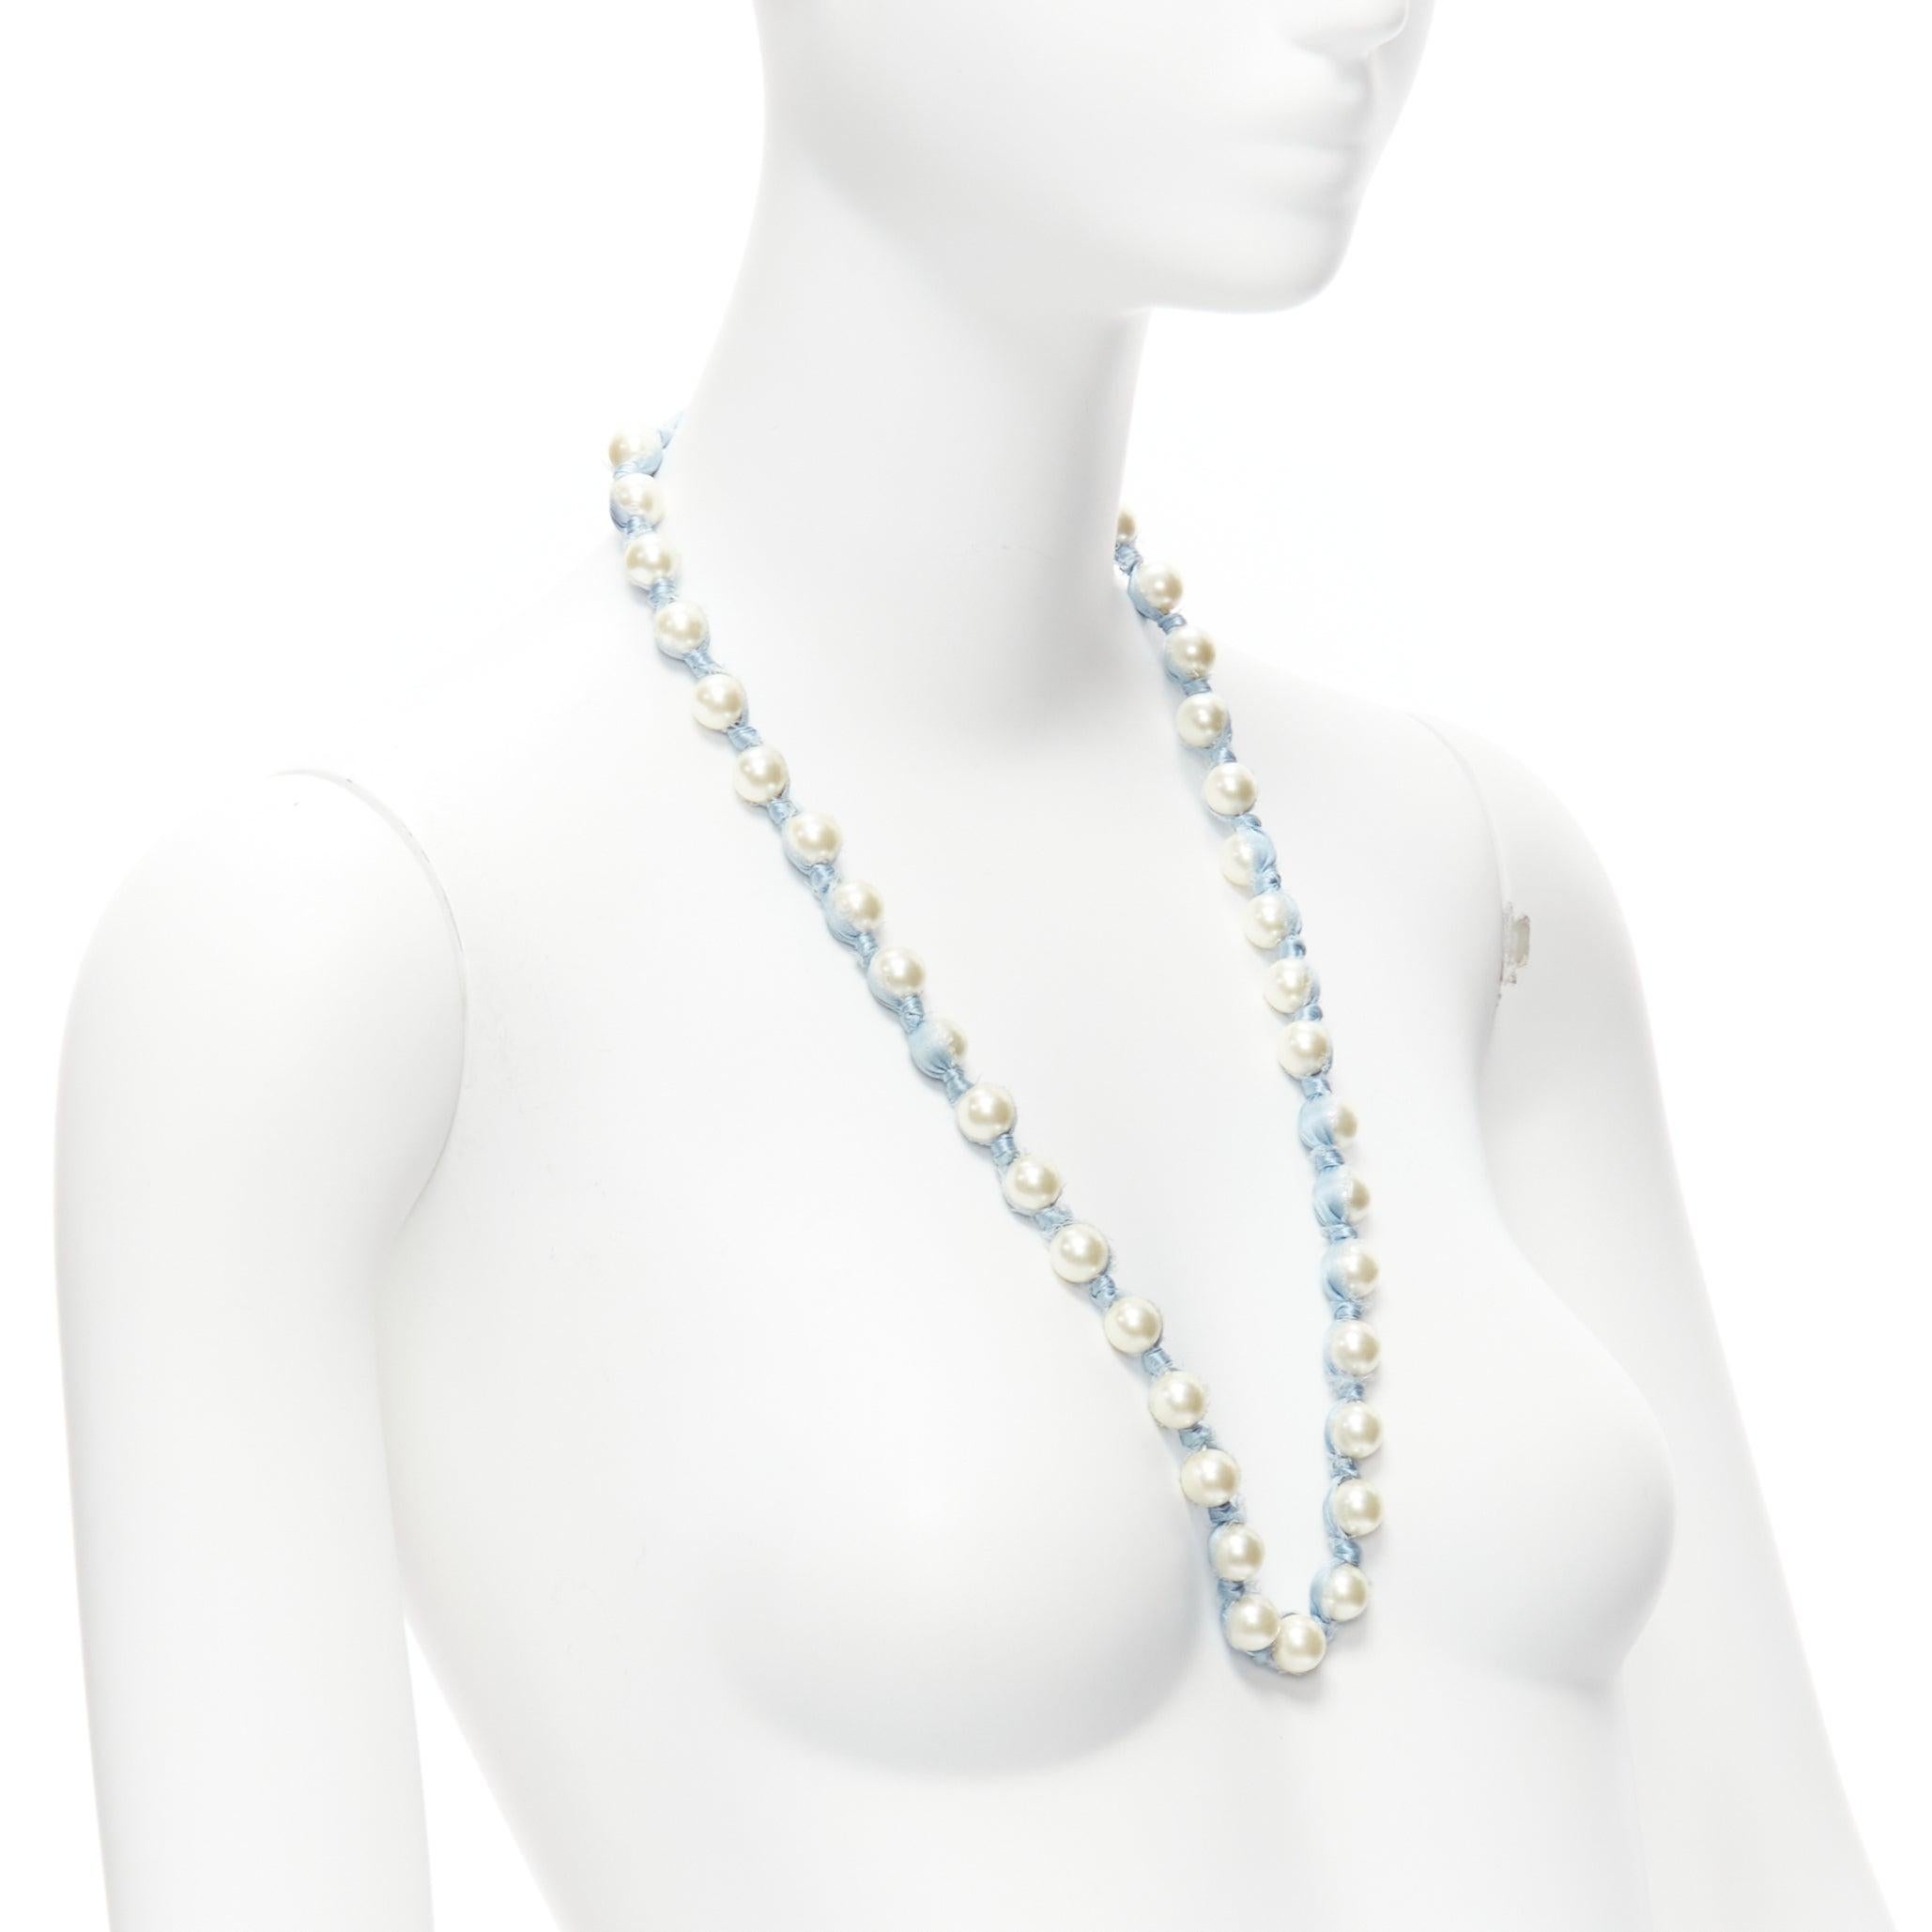 LANVIN ALBER ELBAZ cream pearl blue silk ribbon wrap long necklace In Excellent Condition For Sale In Hong Kong, NT